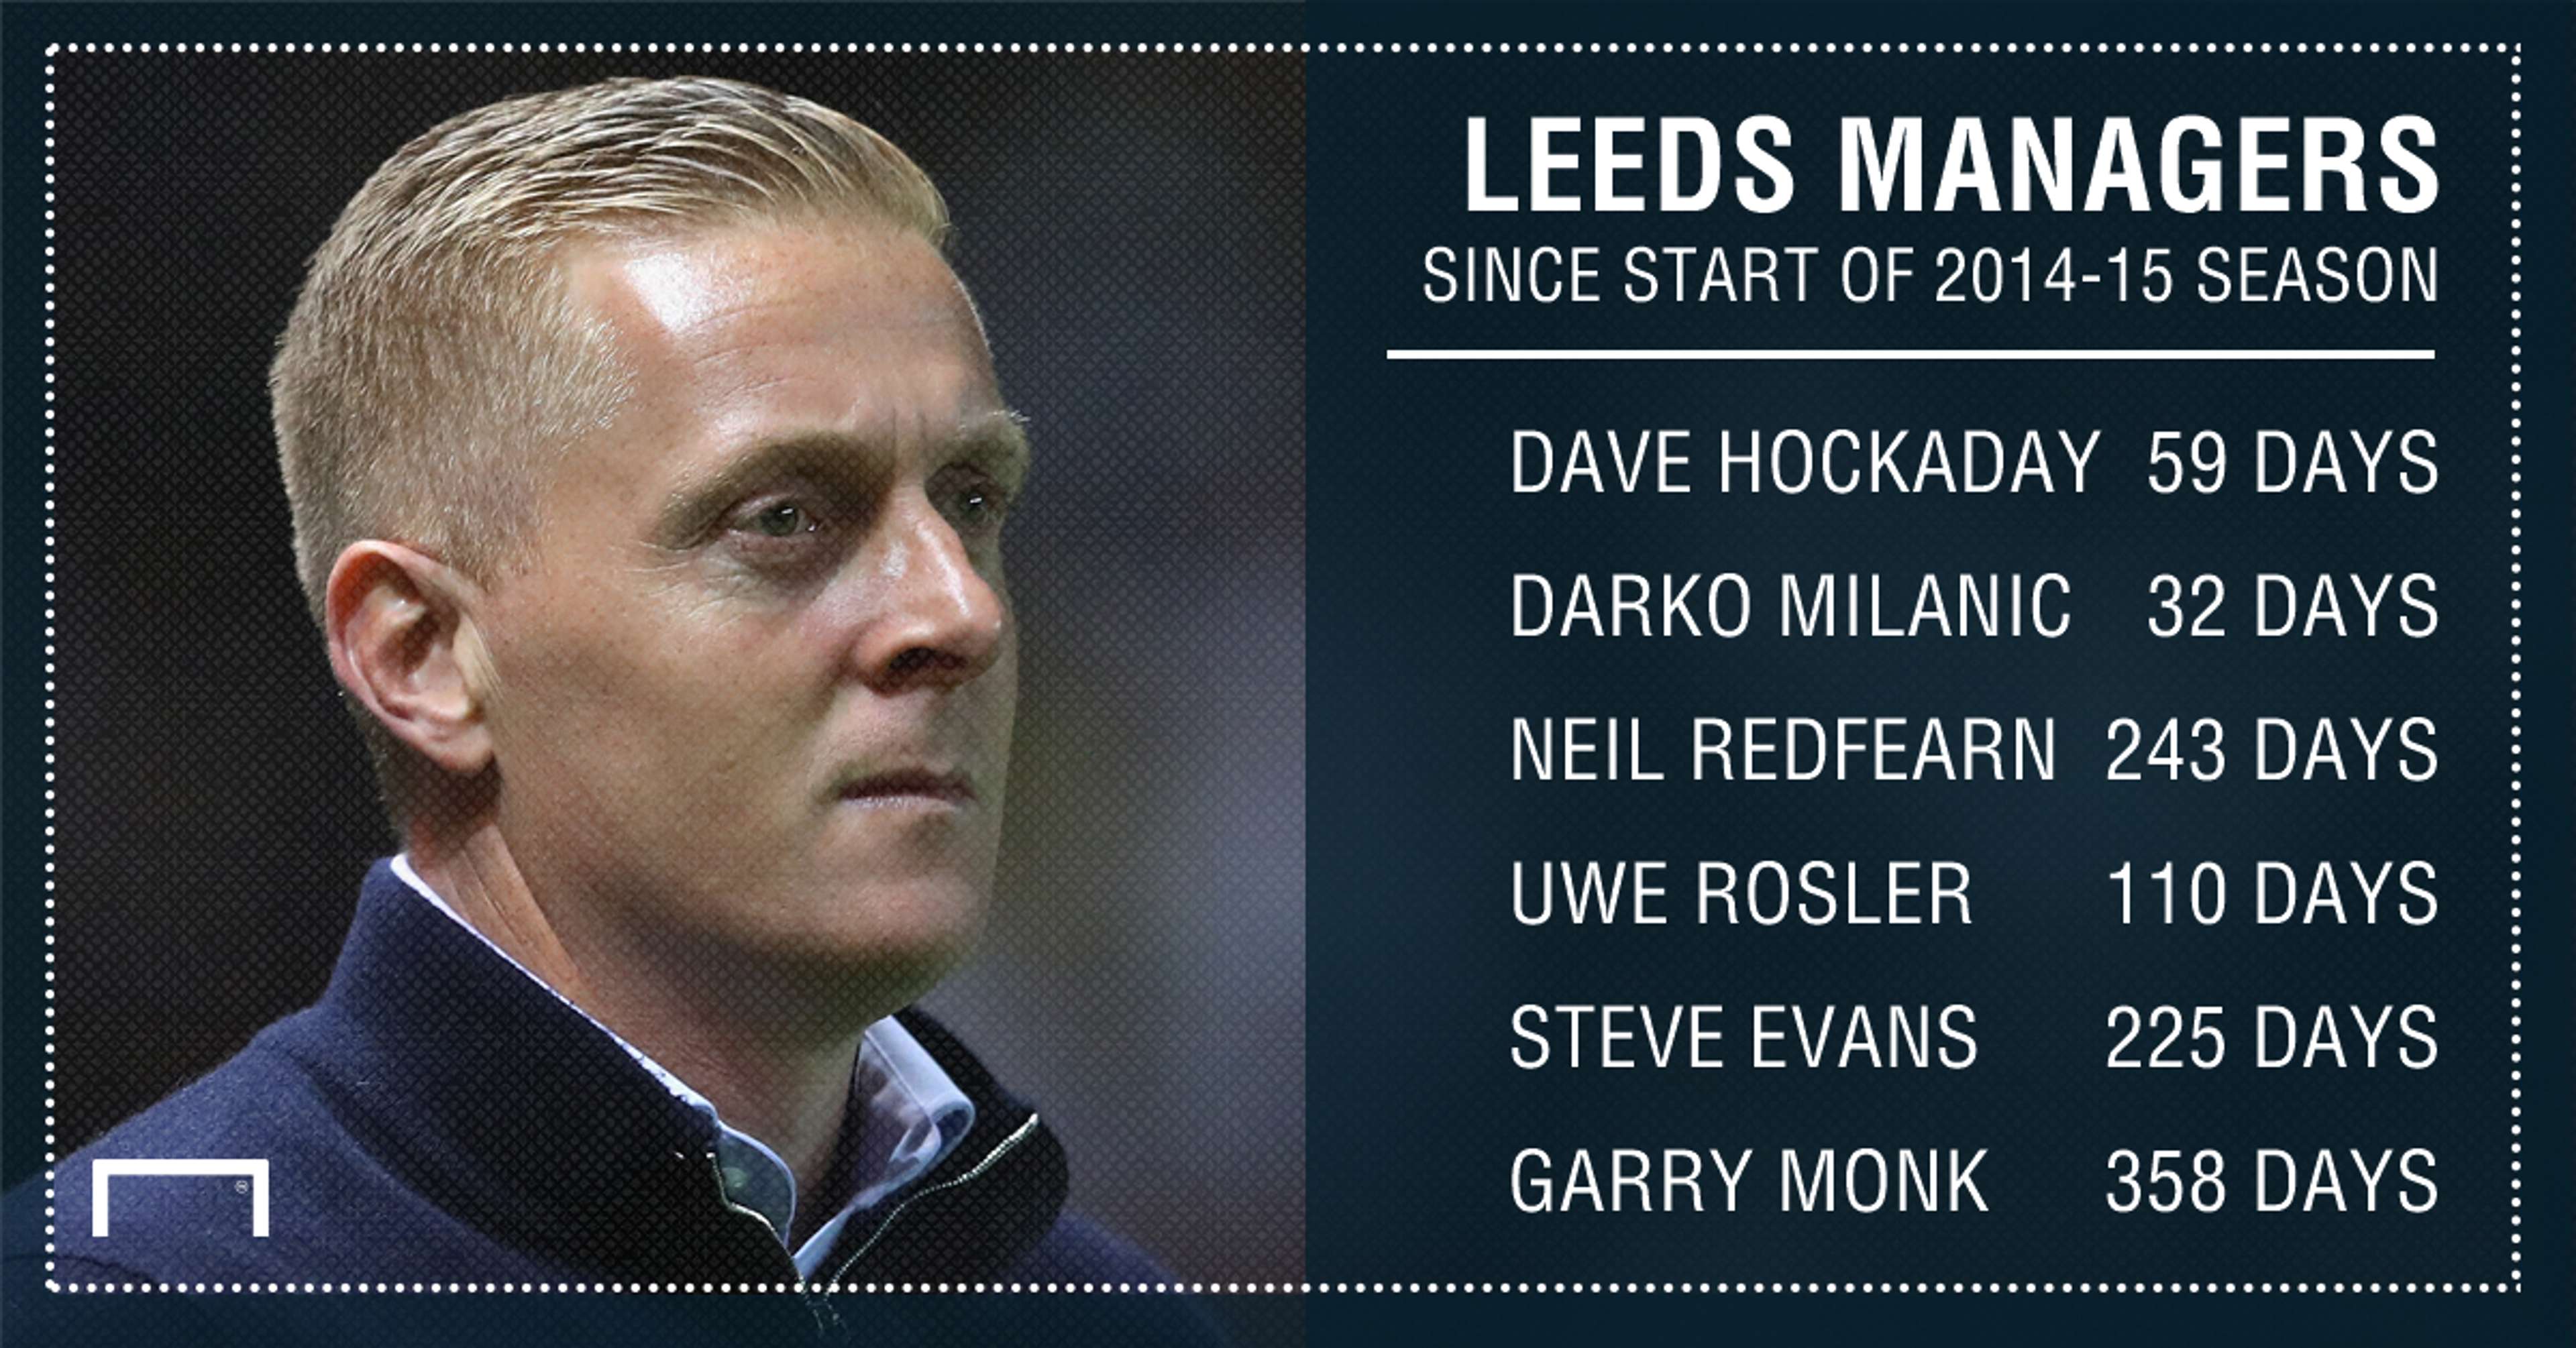 Leeds United Managers GFX